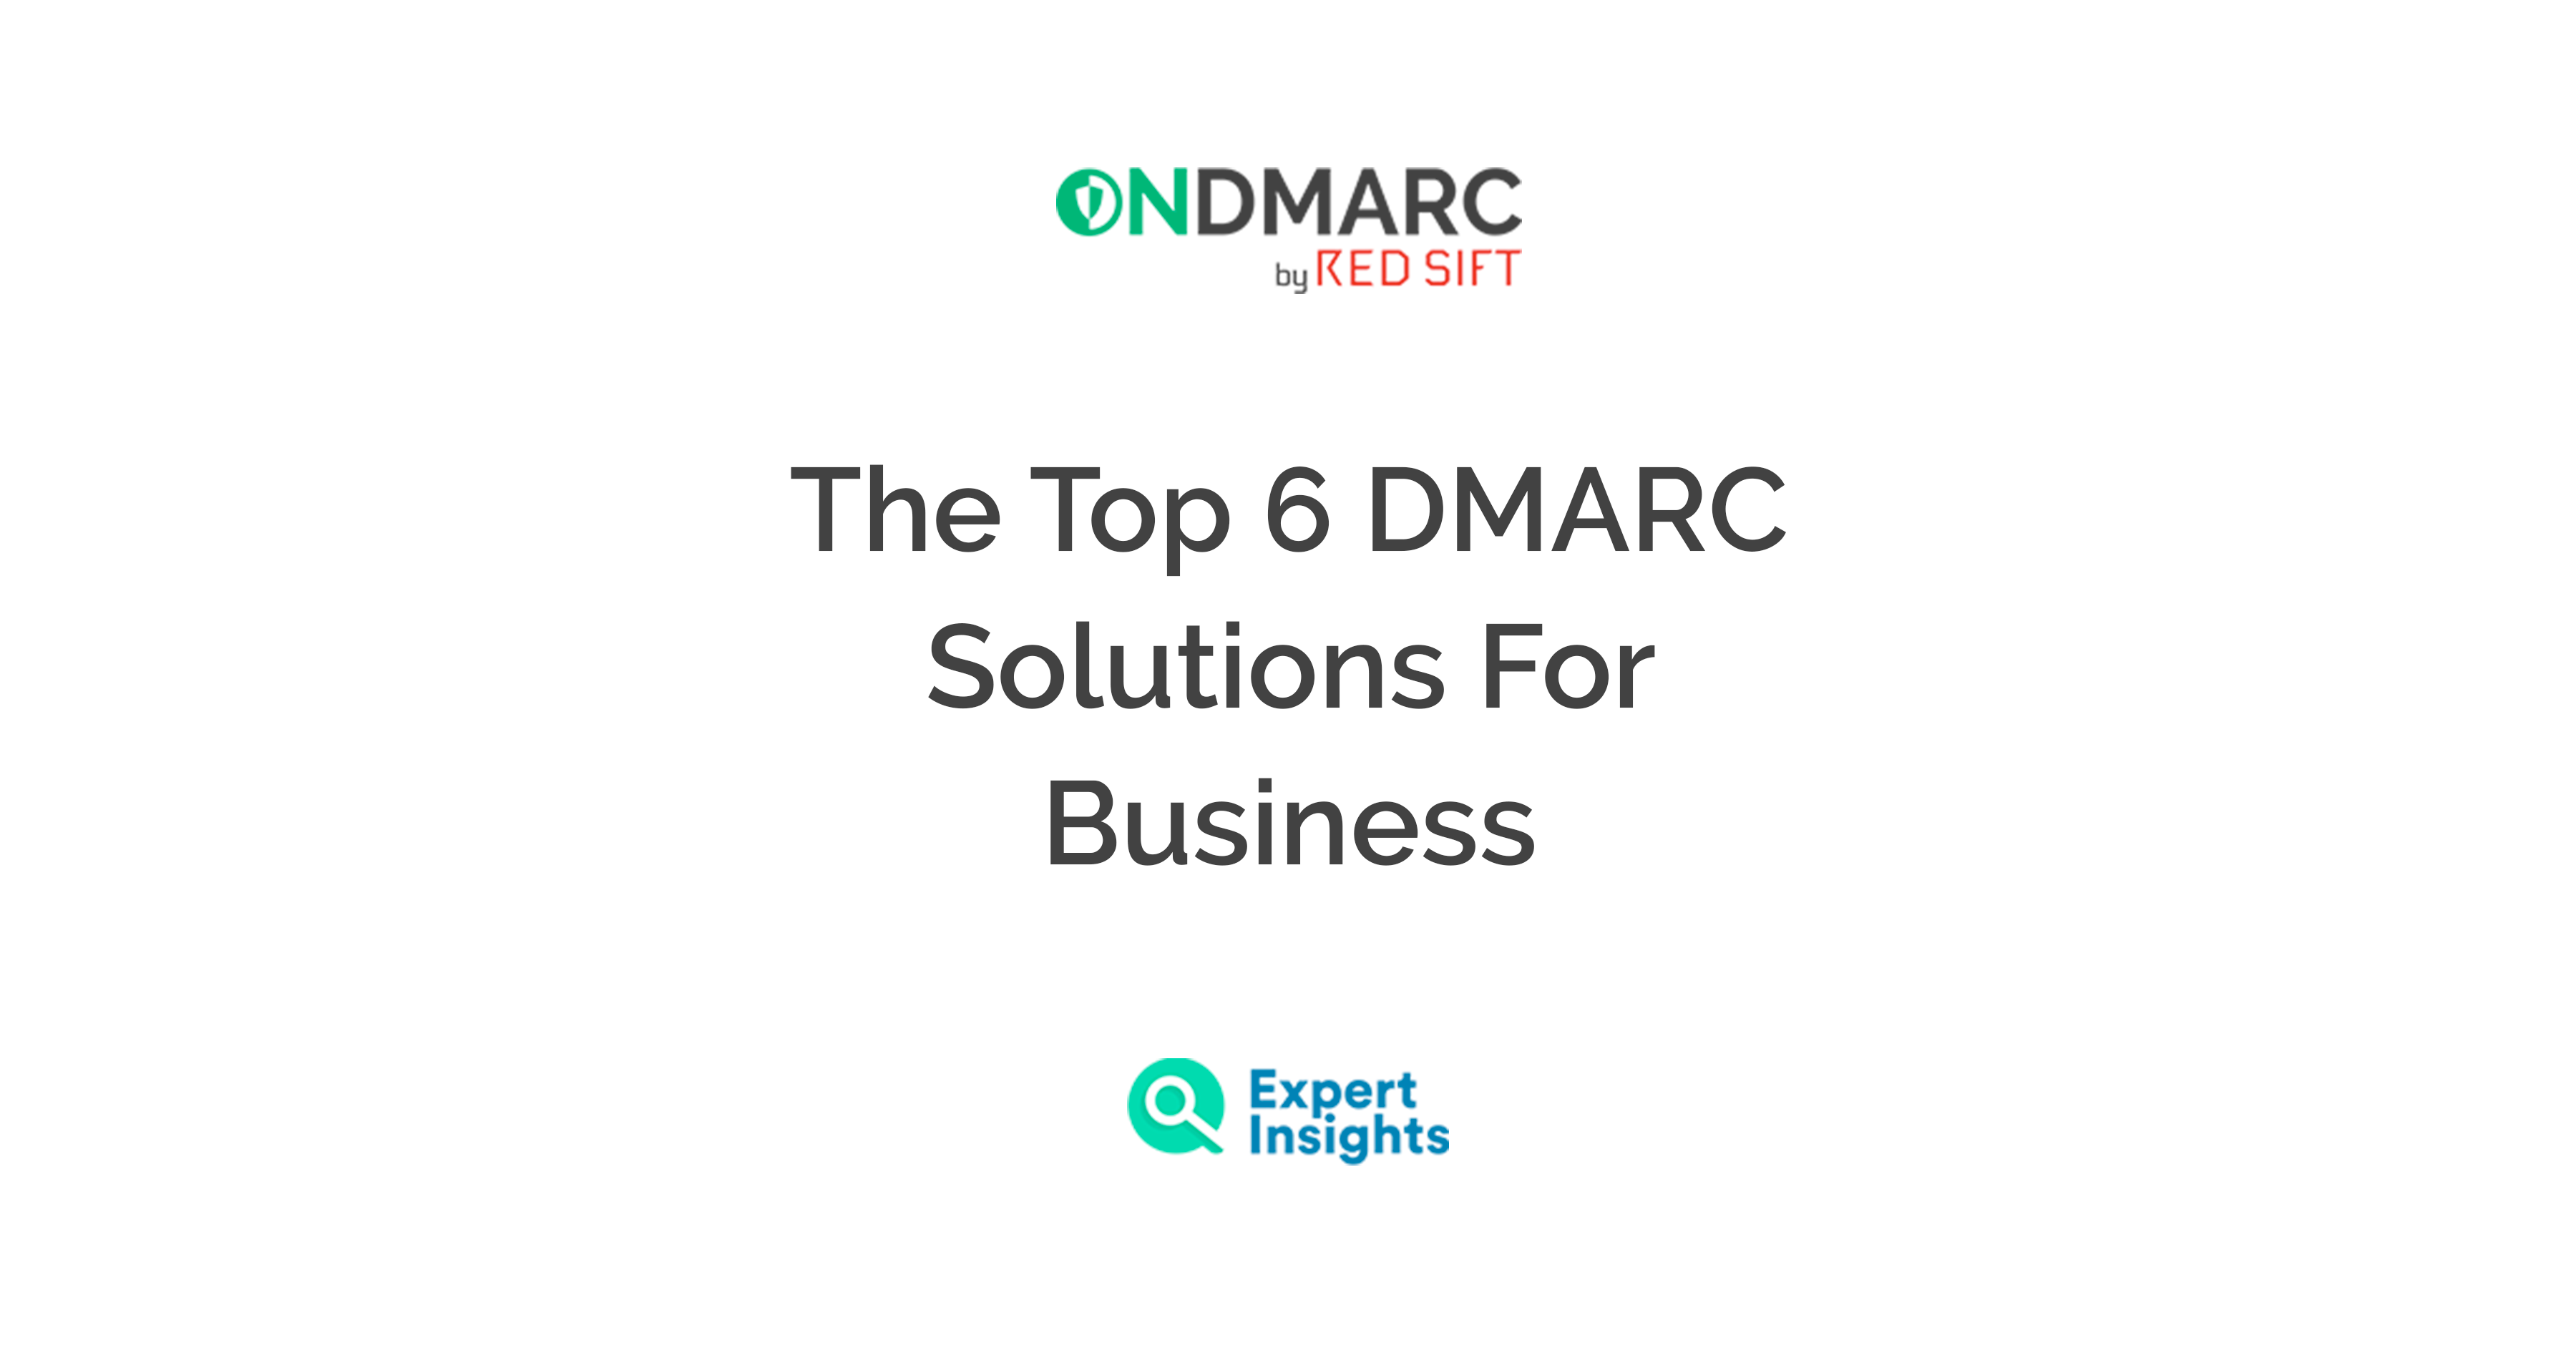 OnDMARC a Top DMARC solutions provider for Business